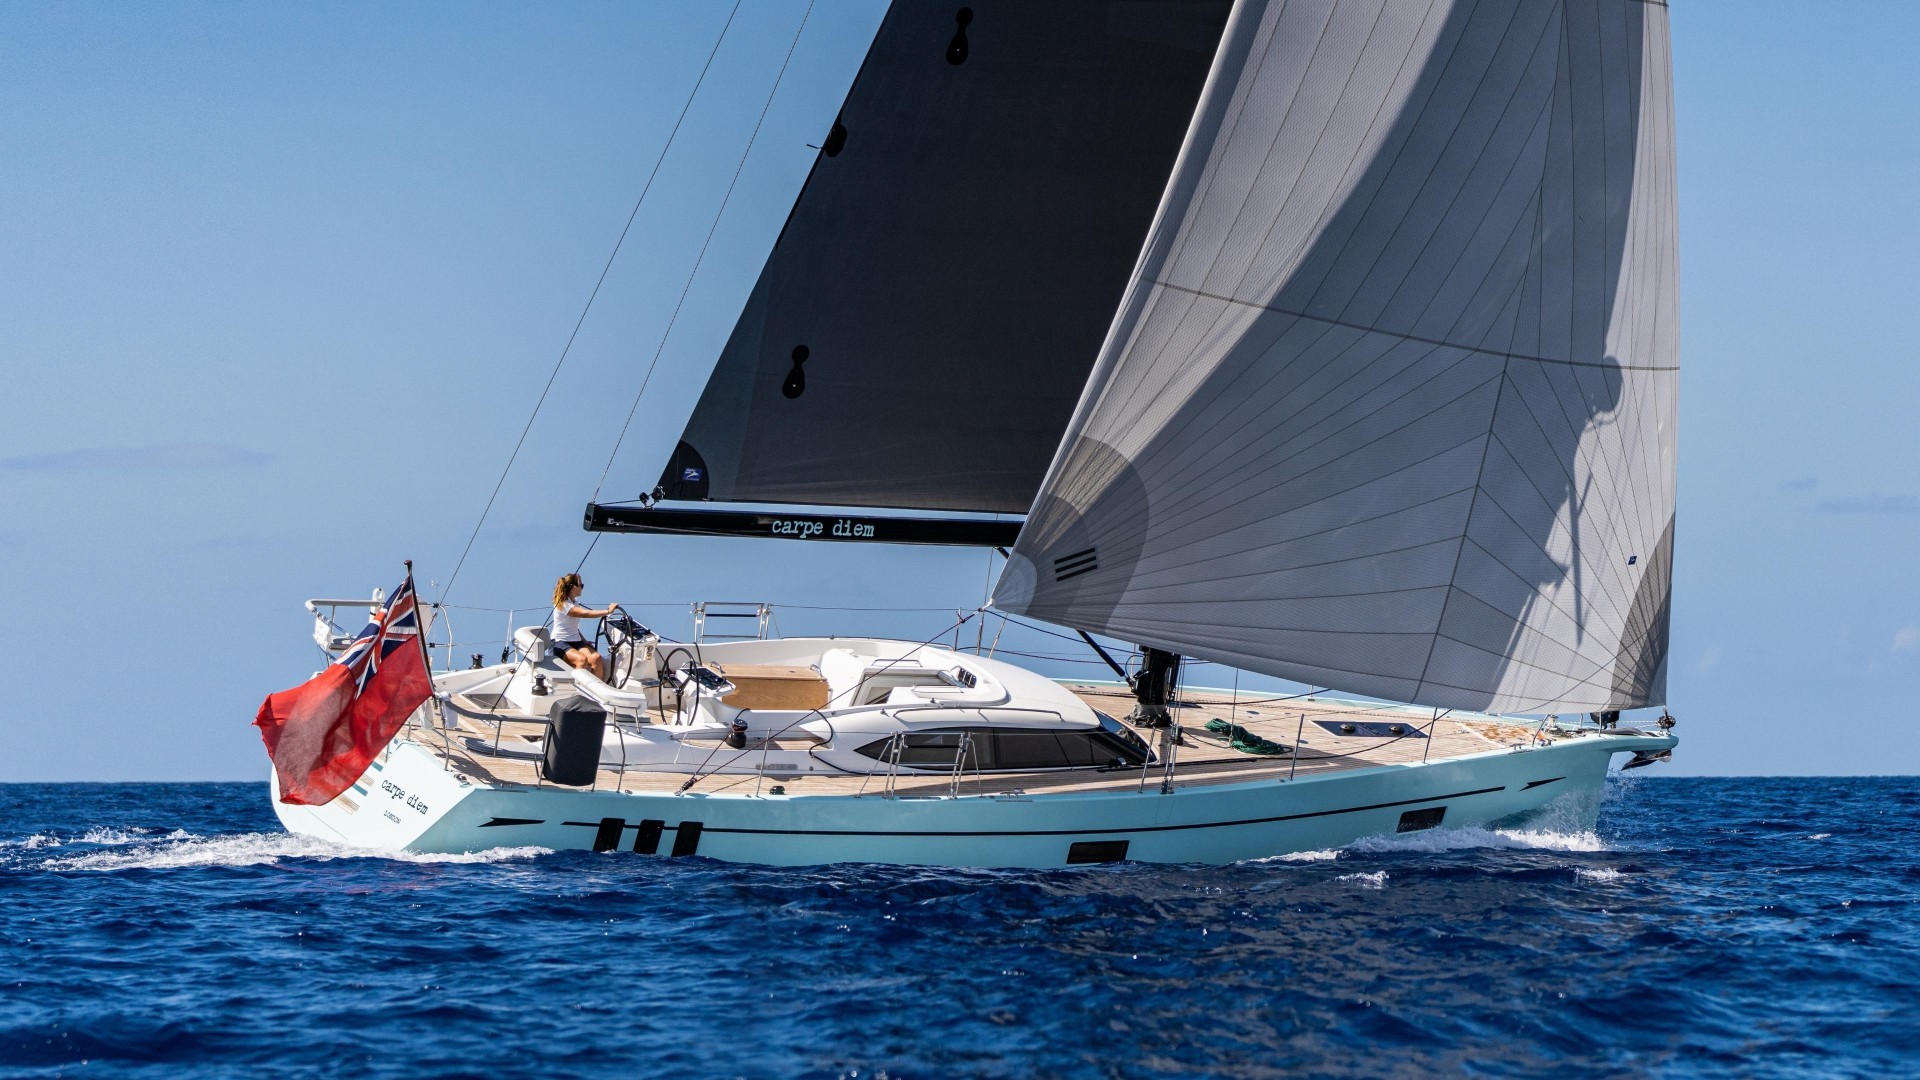 Oyster 495 nominated for British Yachting Awards